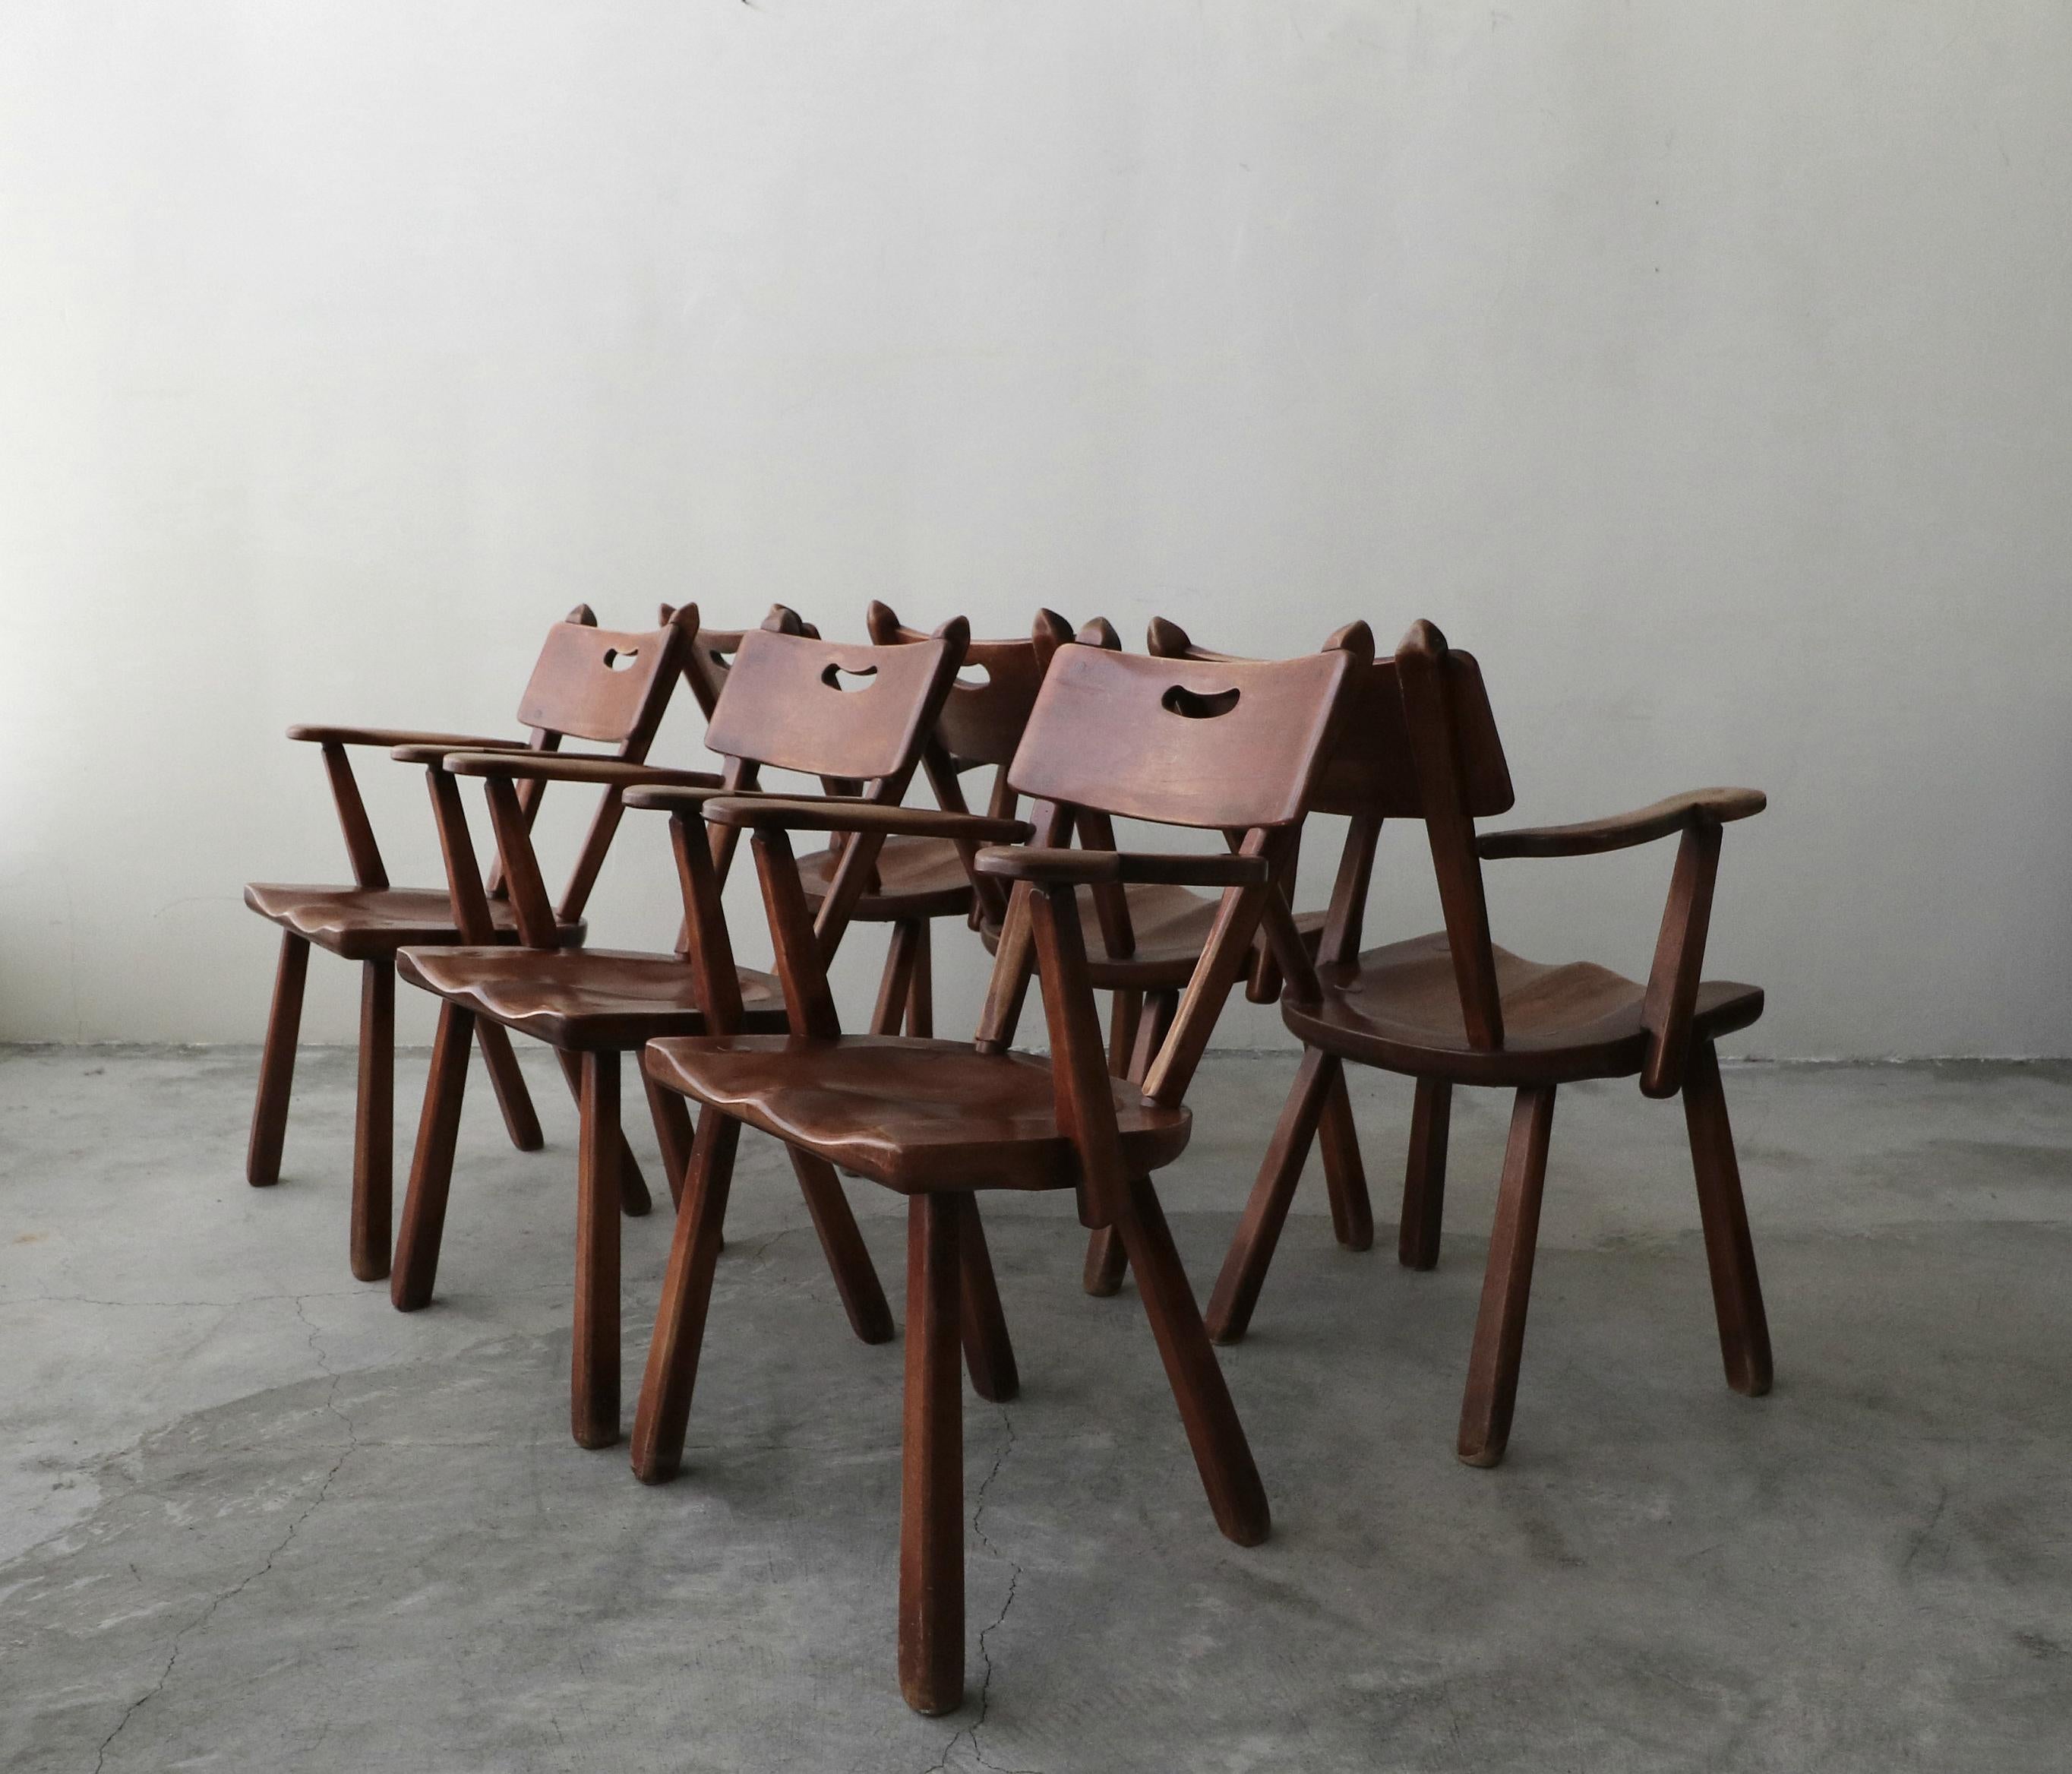 One of a kind set of handcrafted, midcentury Studio Craft chairs signed.

Constructed of solid wood and joined with dowels. Seamless construction, with beautiful lines, a truly unique set. Have a knack for the unique, love having pieces that no